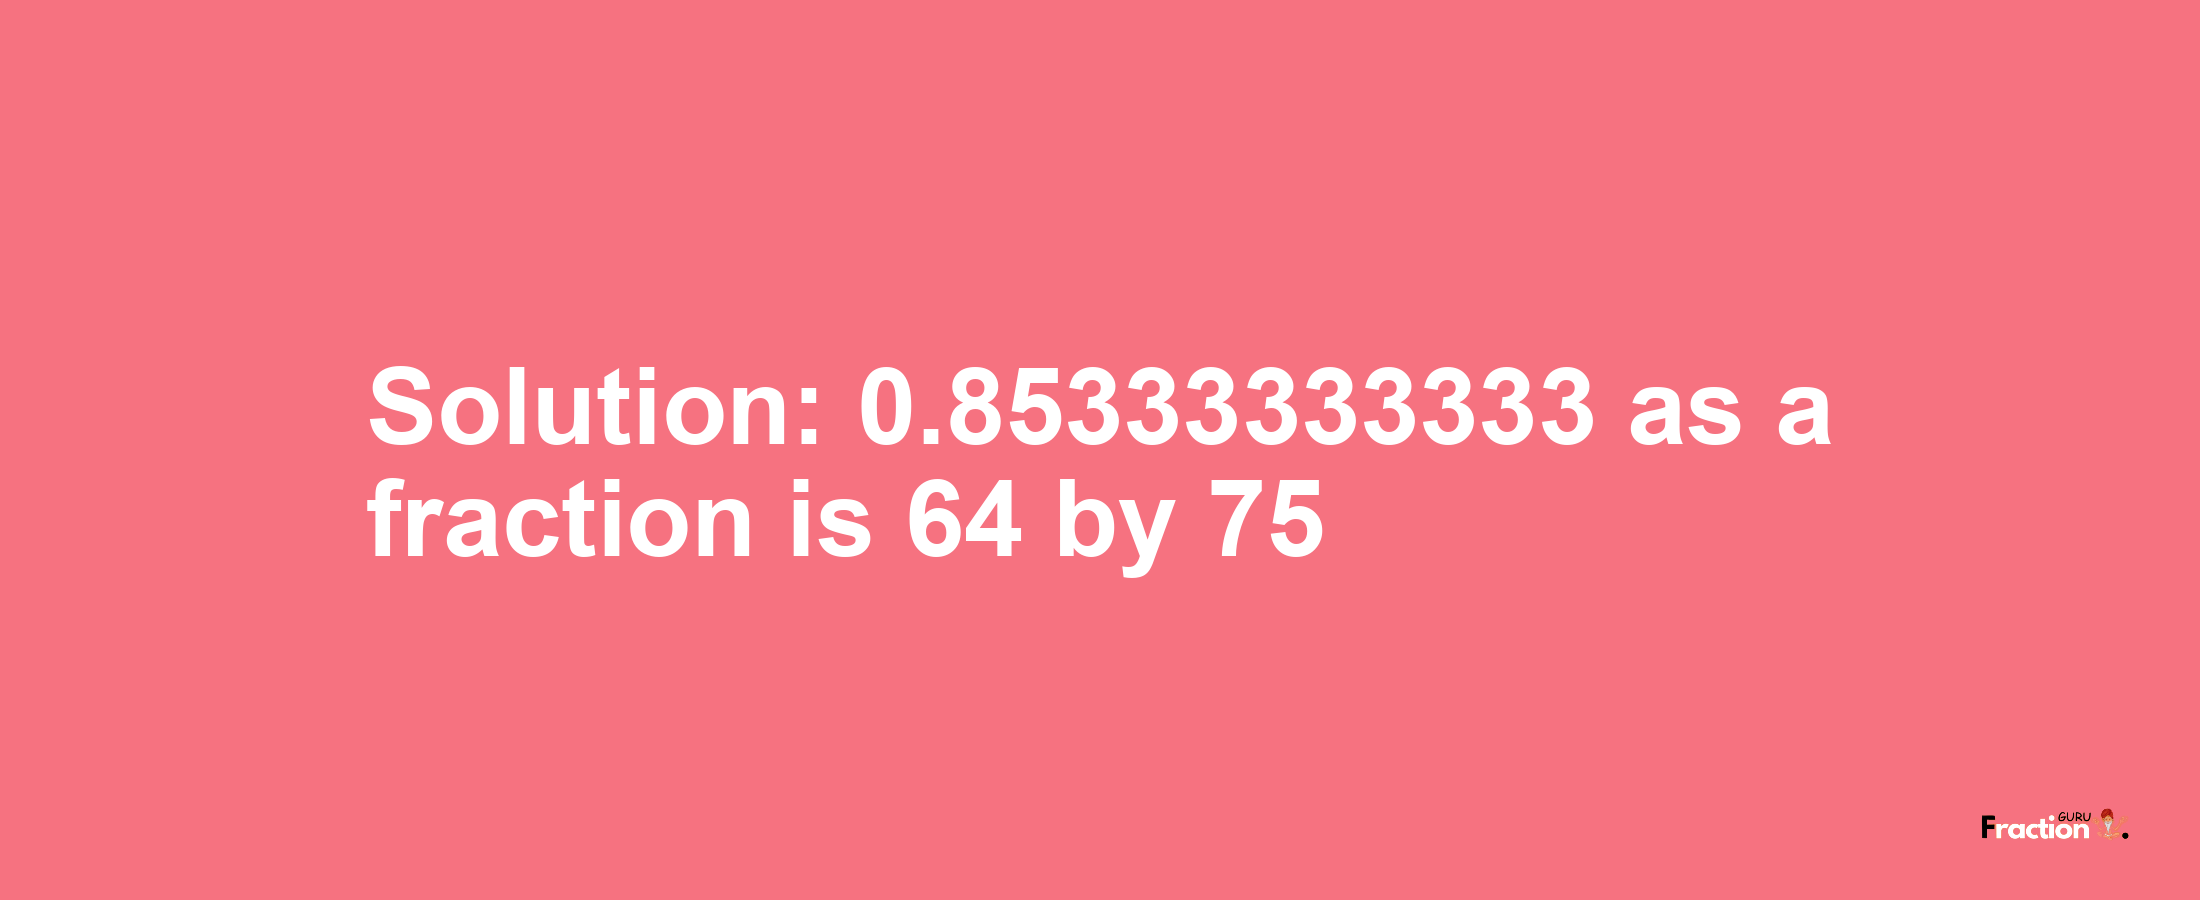 Solution:0.85333333333 as a fraction is 64/75